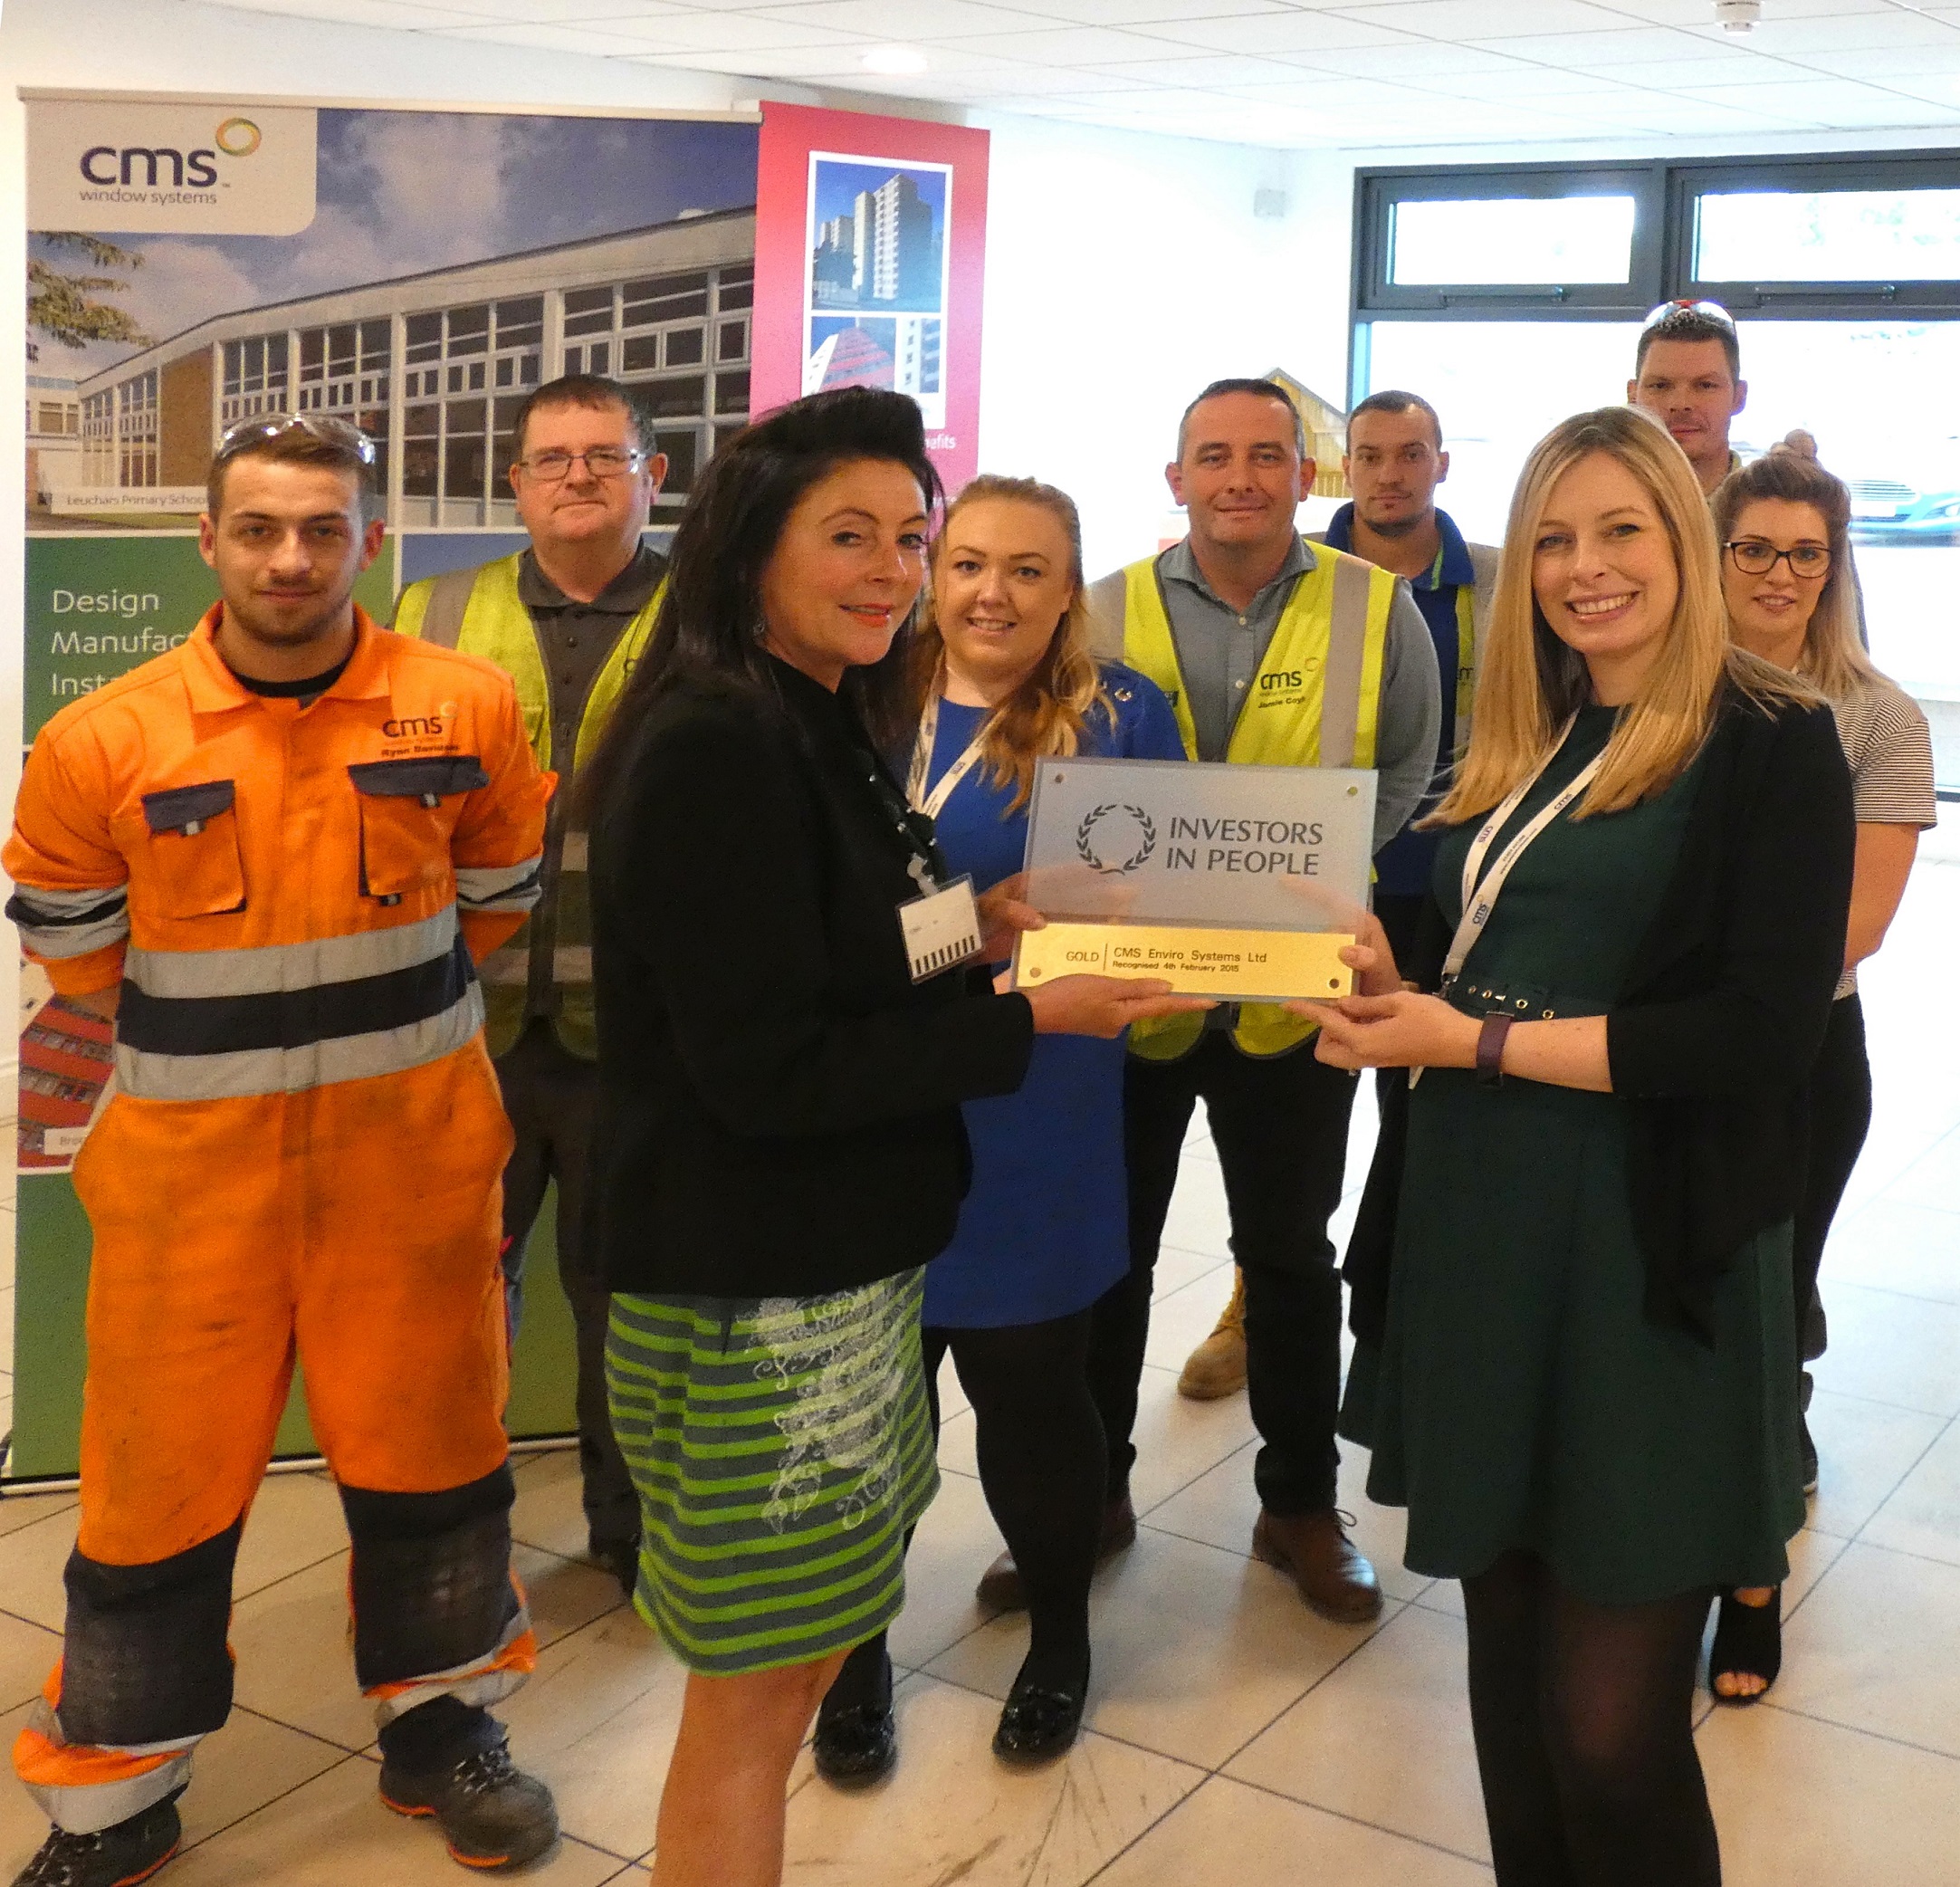 CMS recognised with Investors in People Gold award